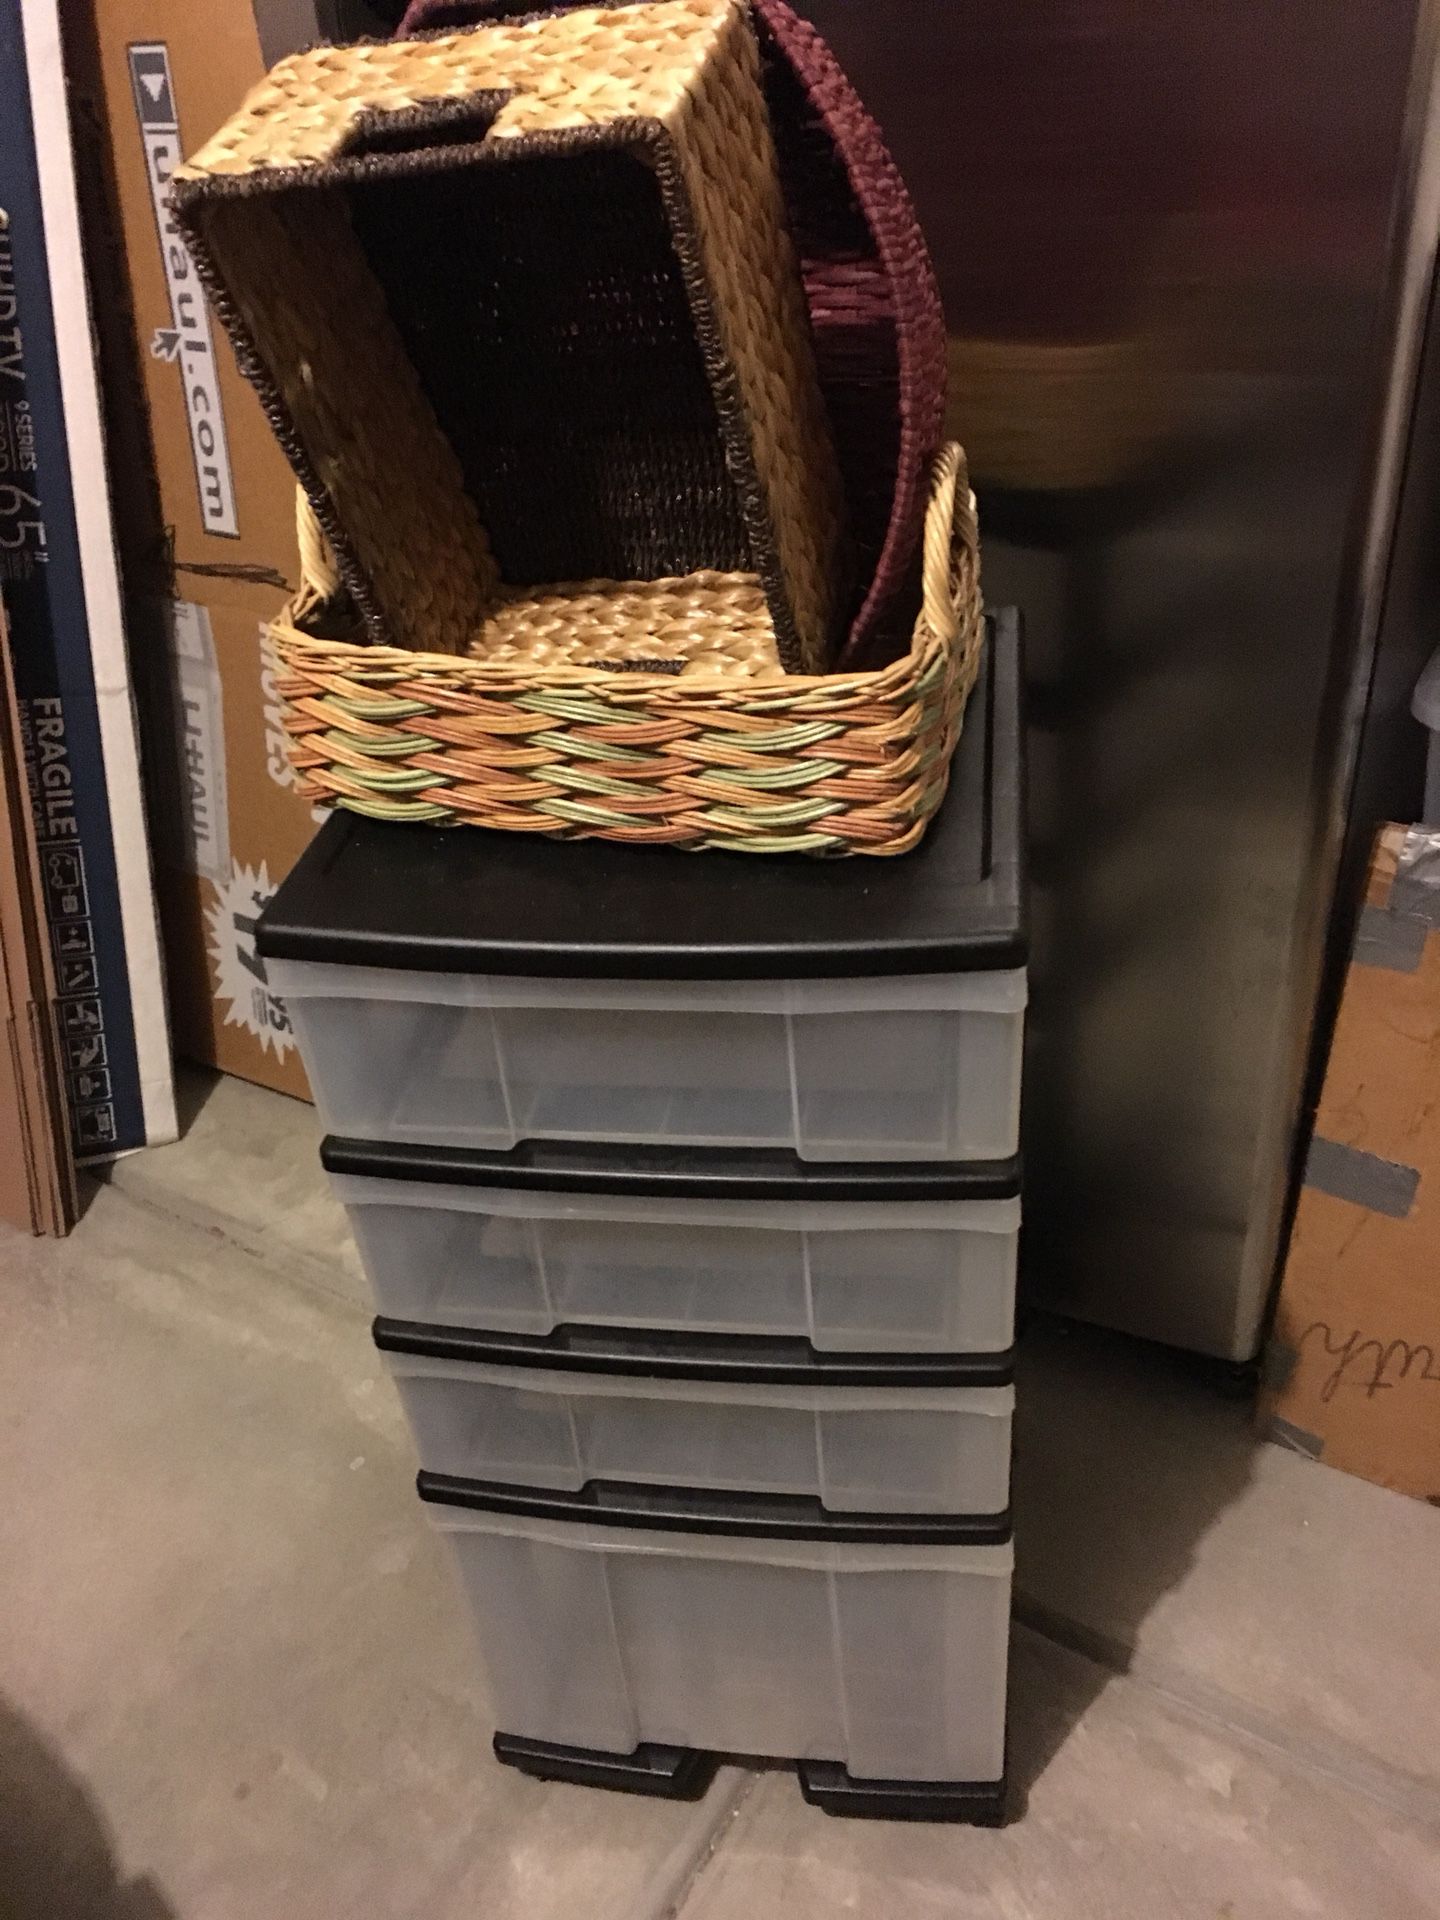 Plastic drawers and baskets $10 for all